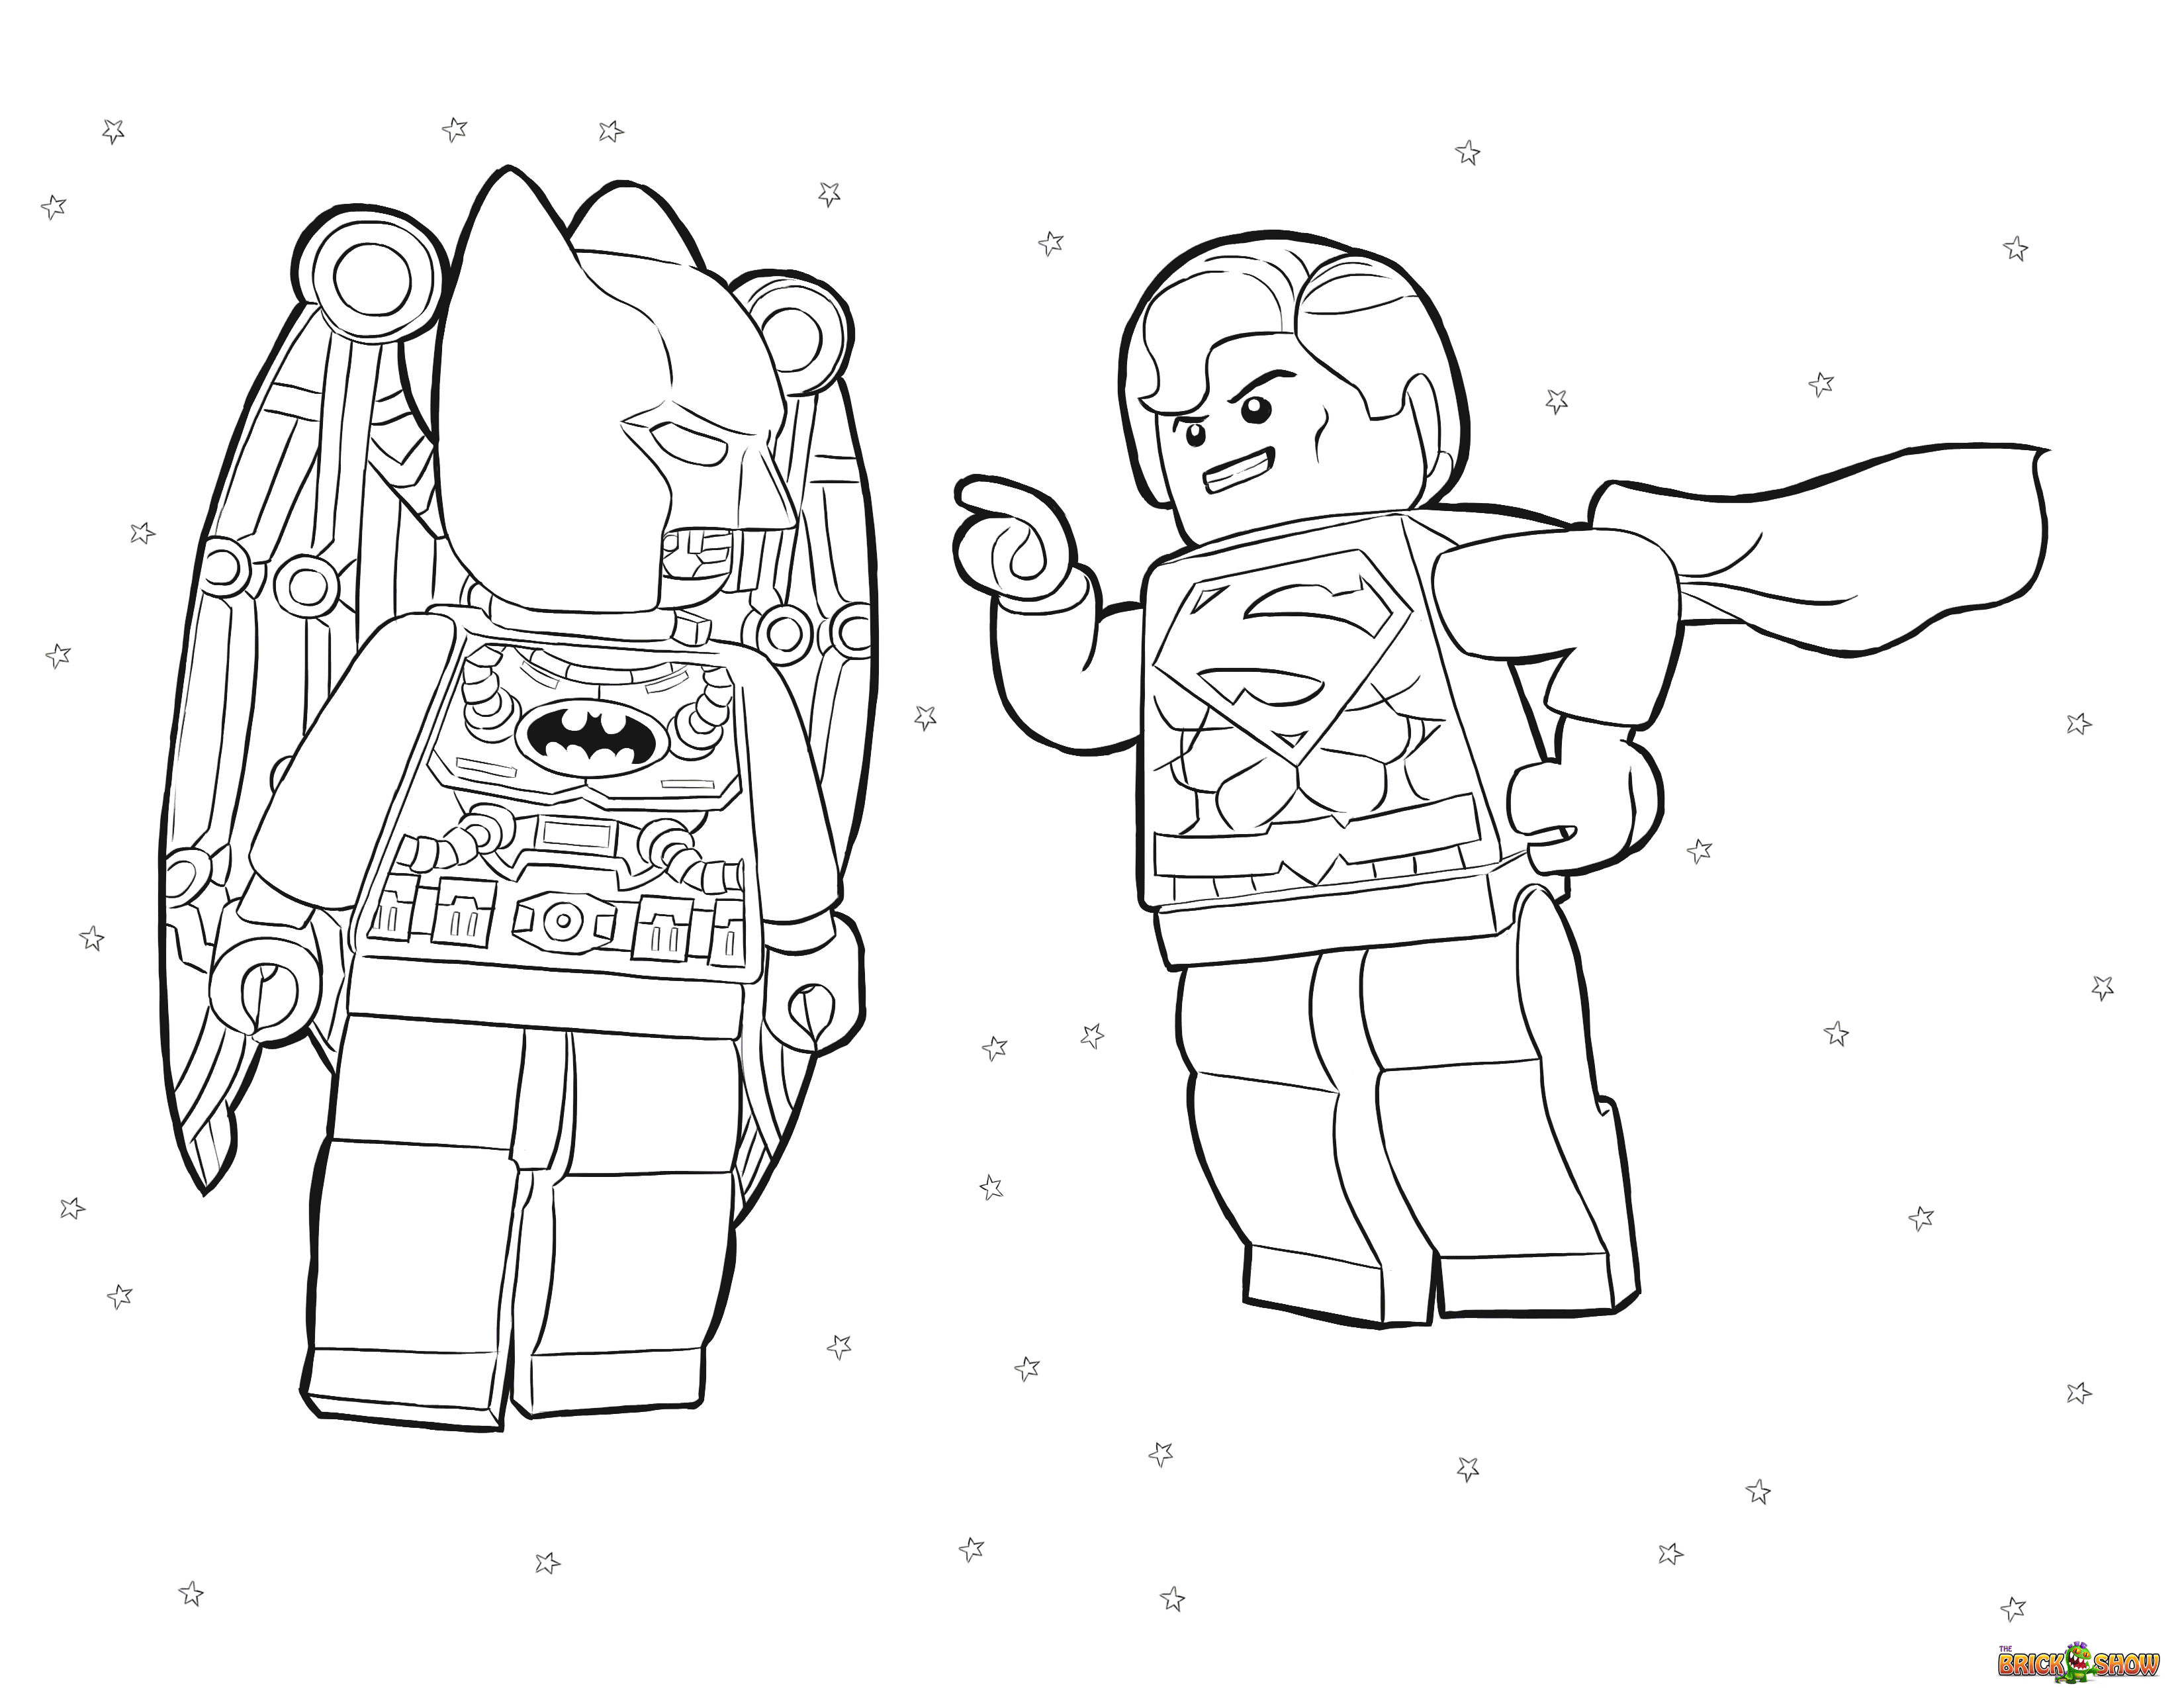 LEGO Superman and Batman in Space coloring page